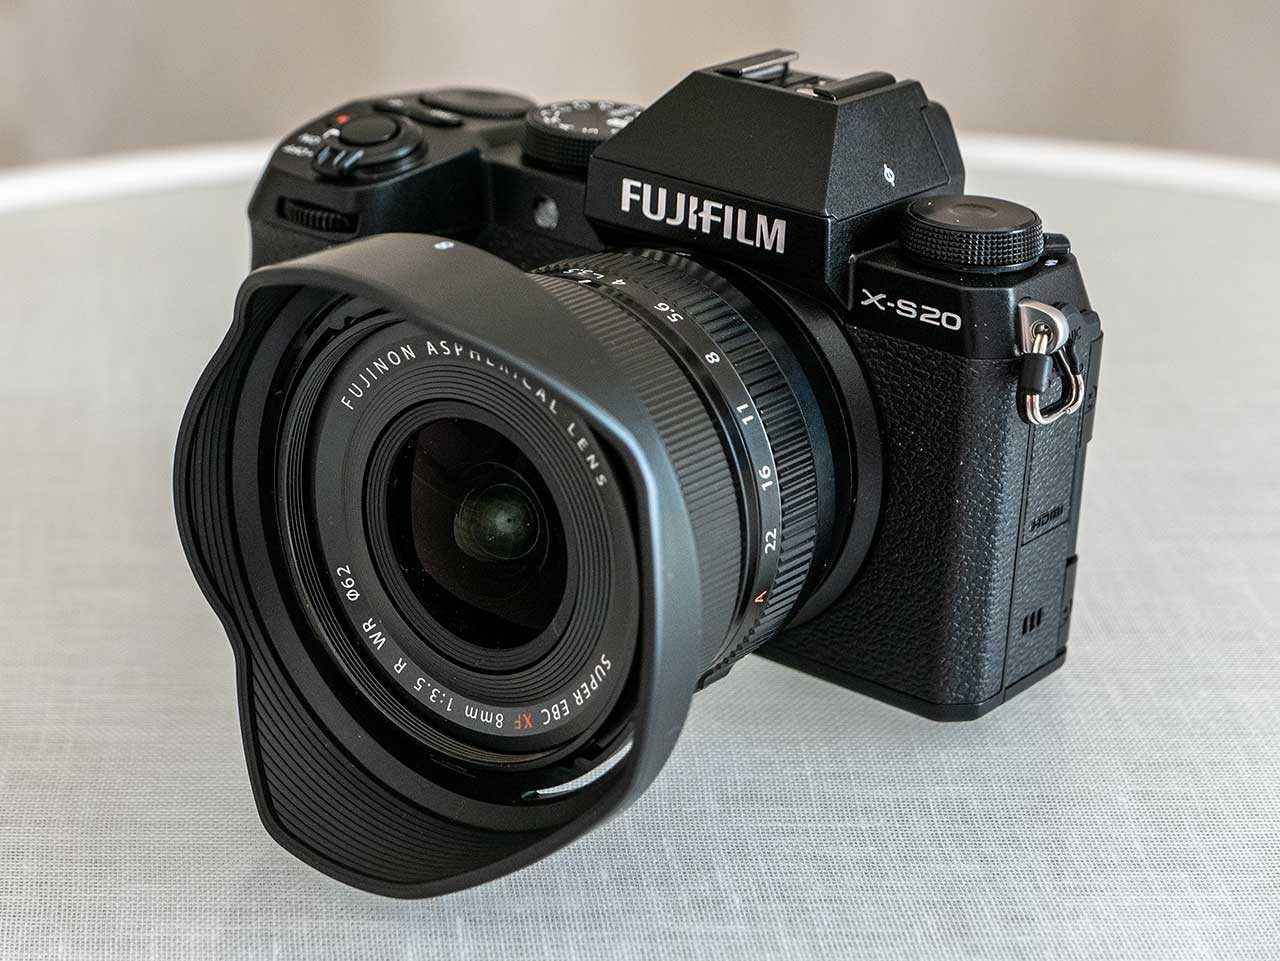 Fujifilm X-S20 review: Digital Photography Review